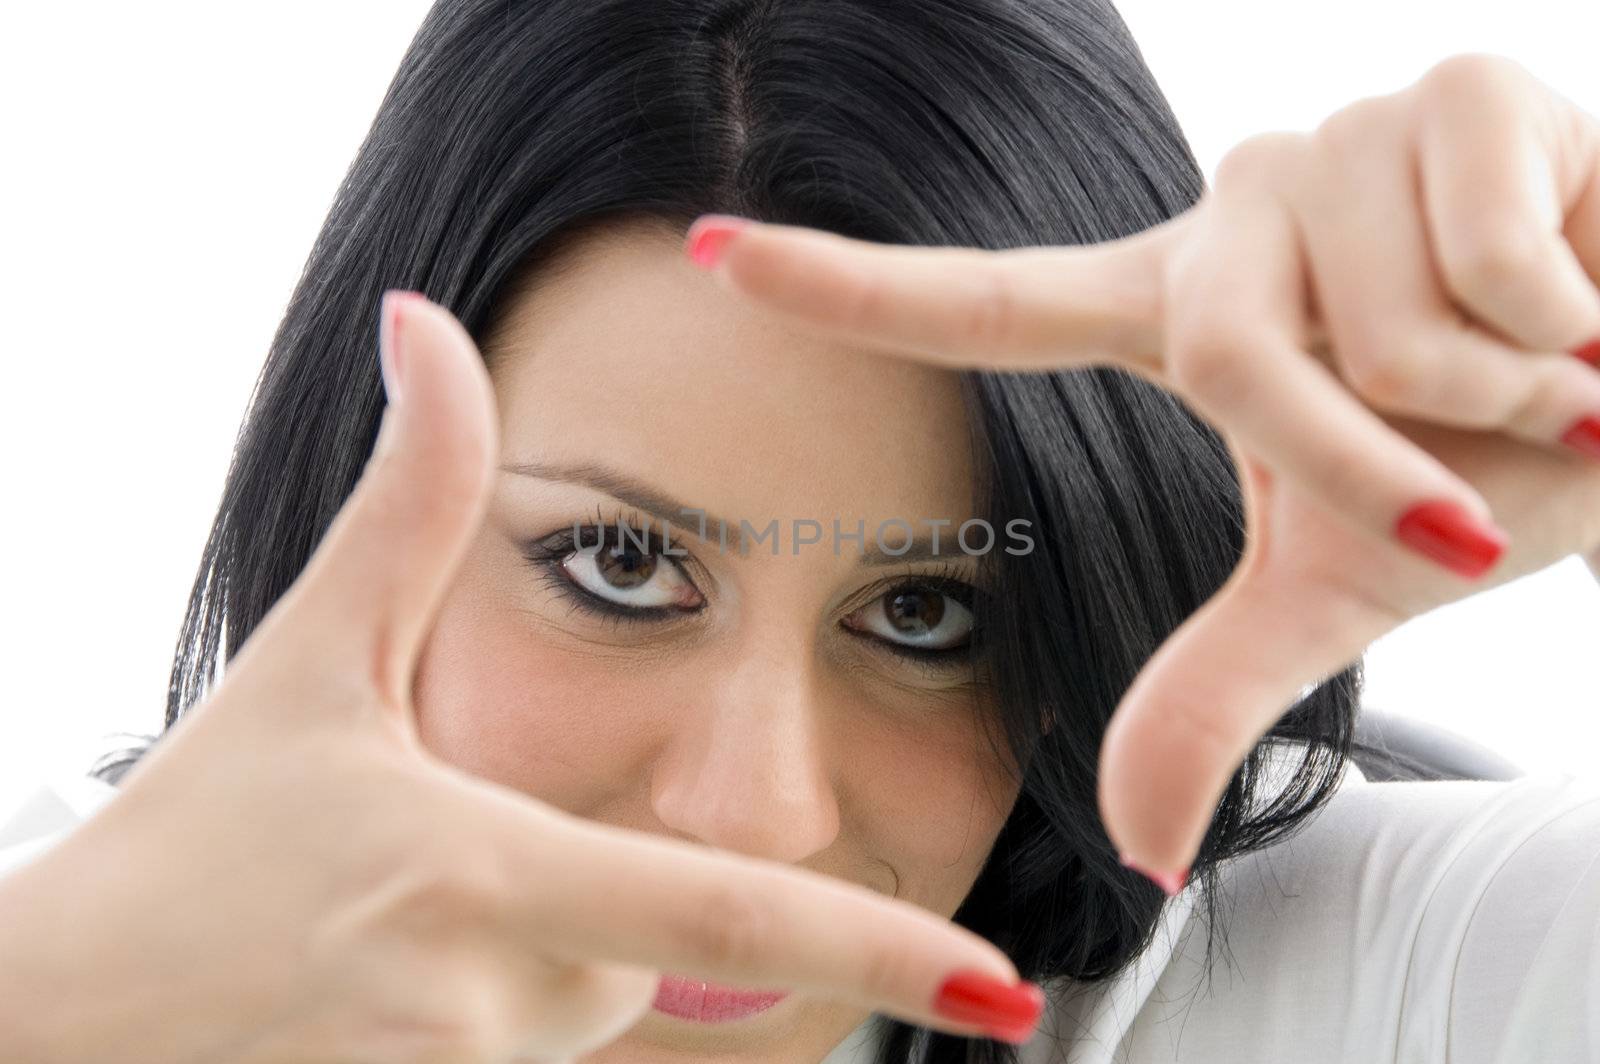 female showing framing hand gesture on an isolated white background